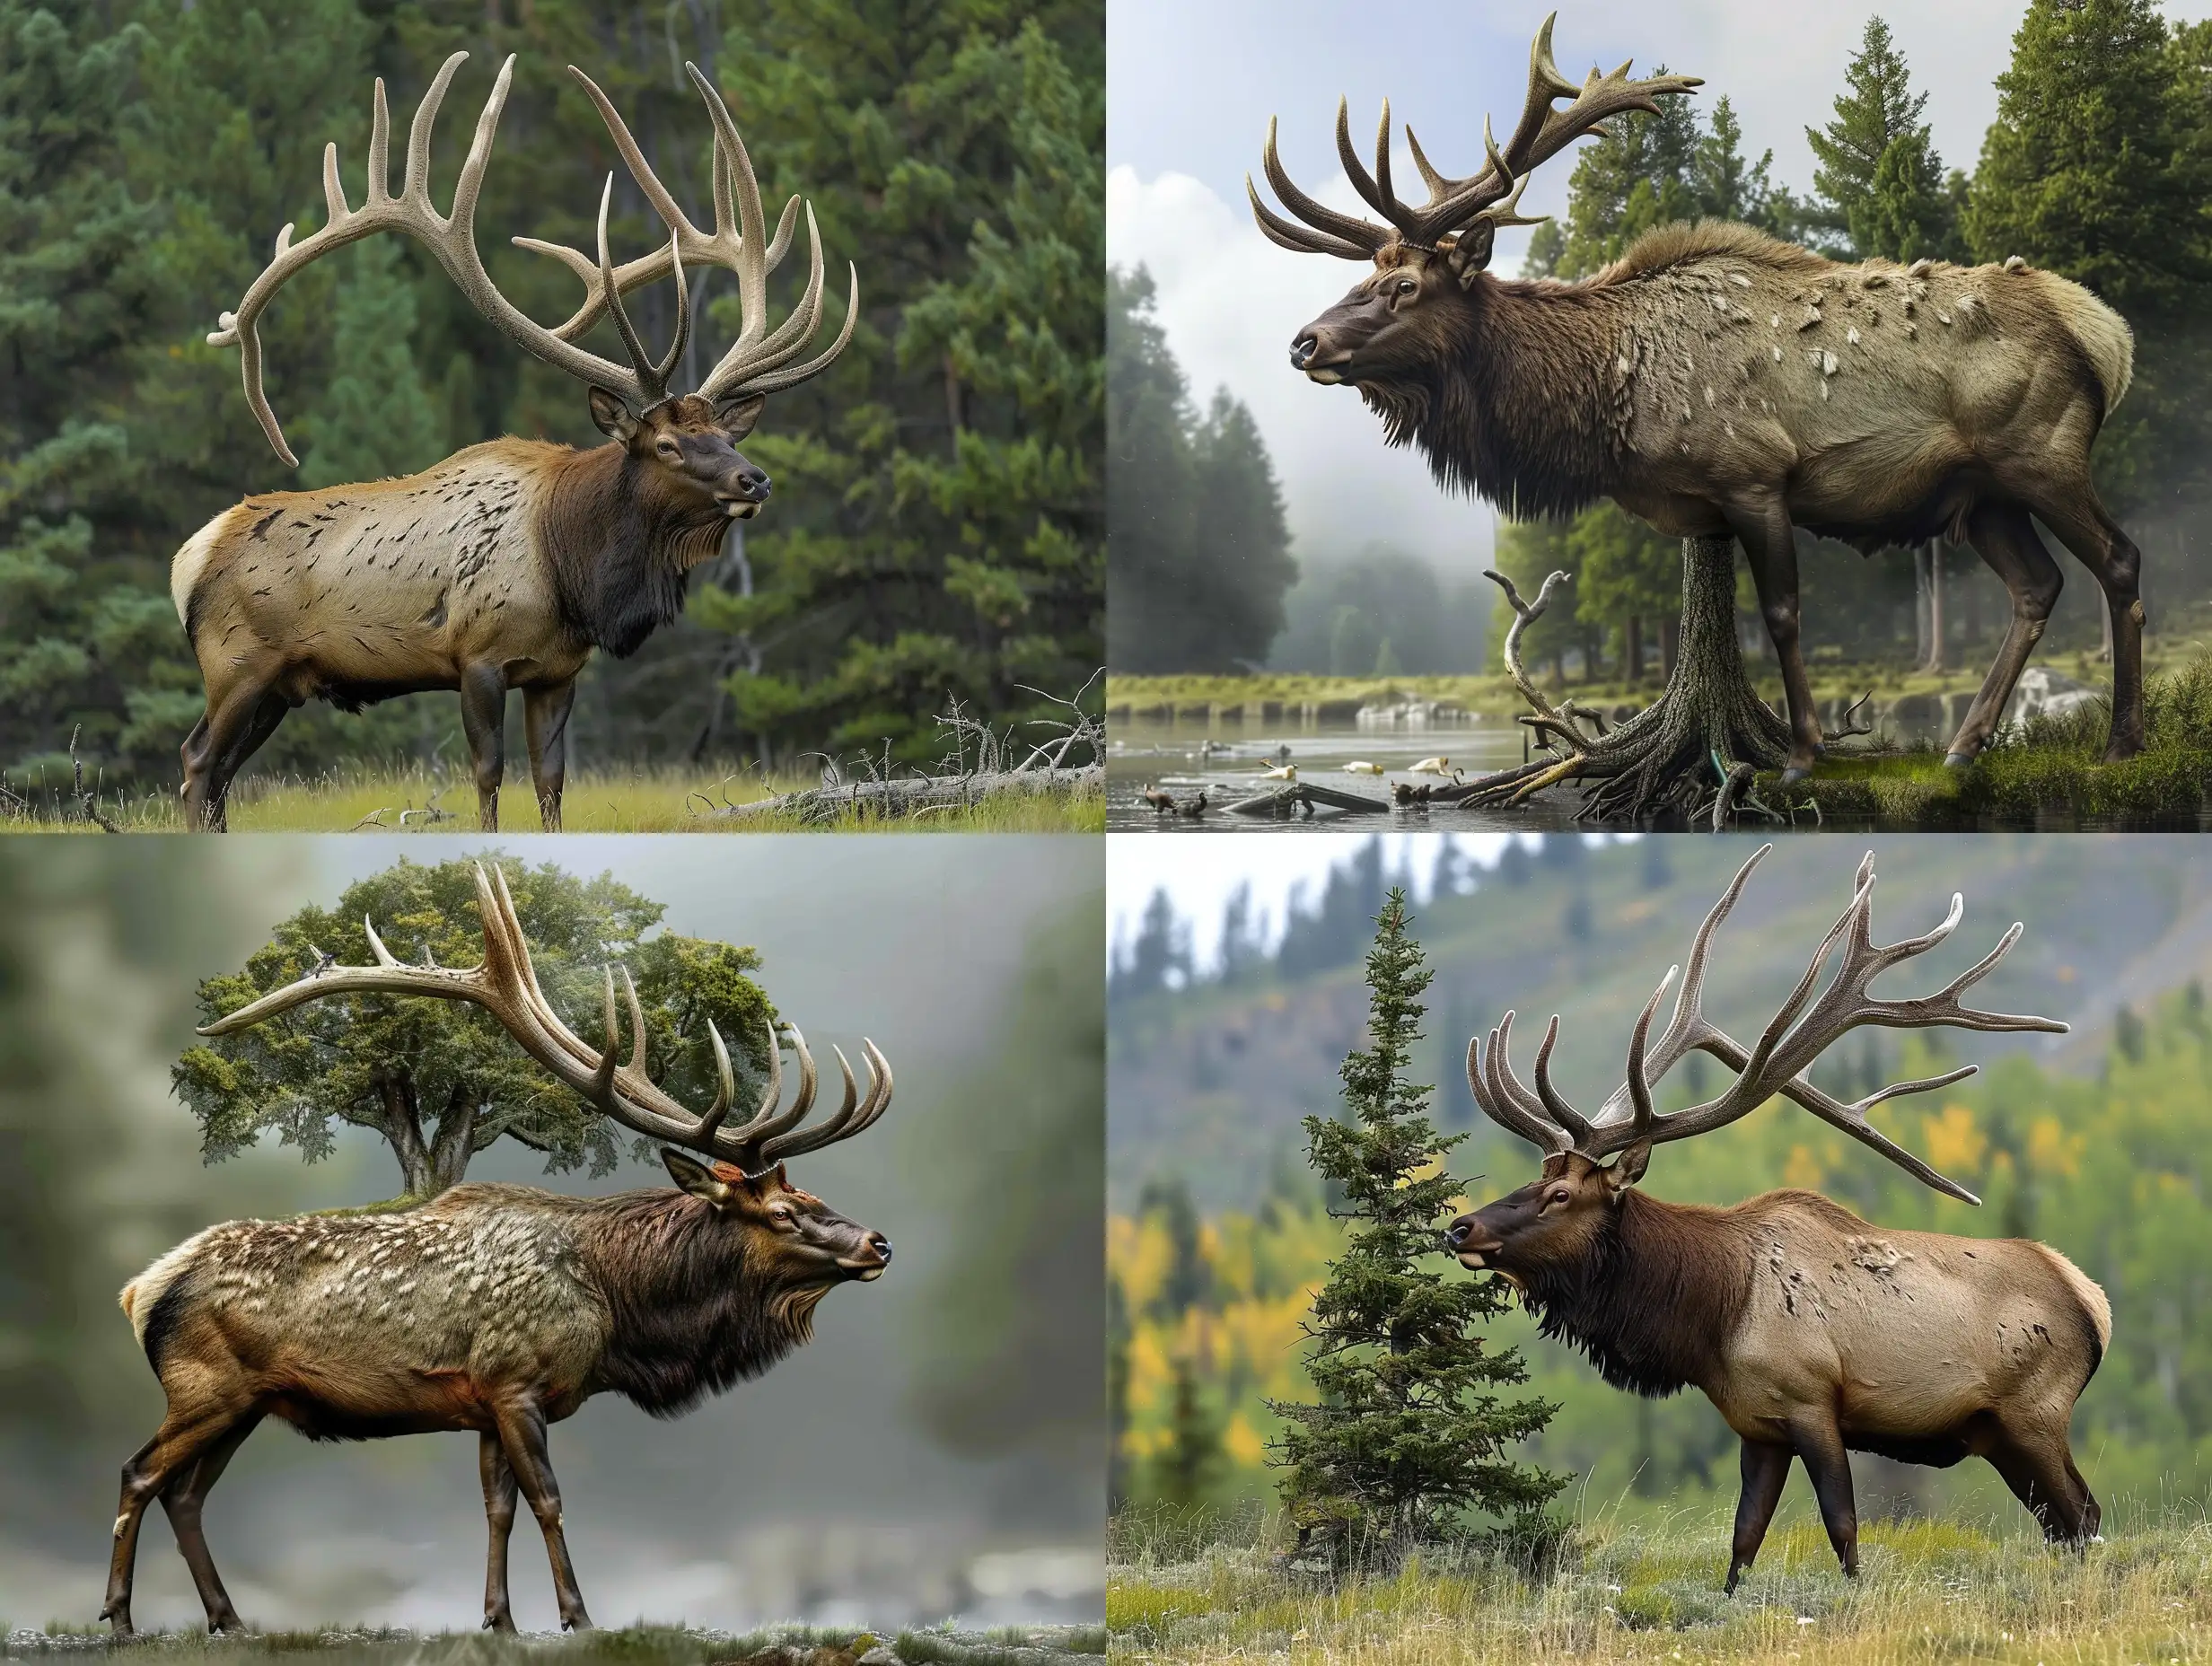 An elk the size of a tree